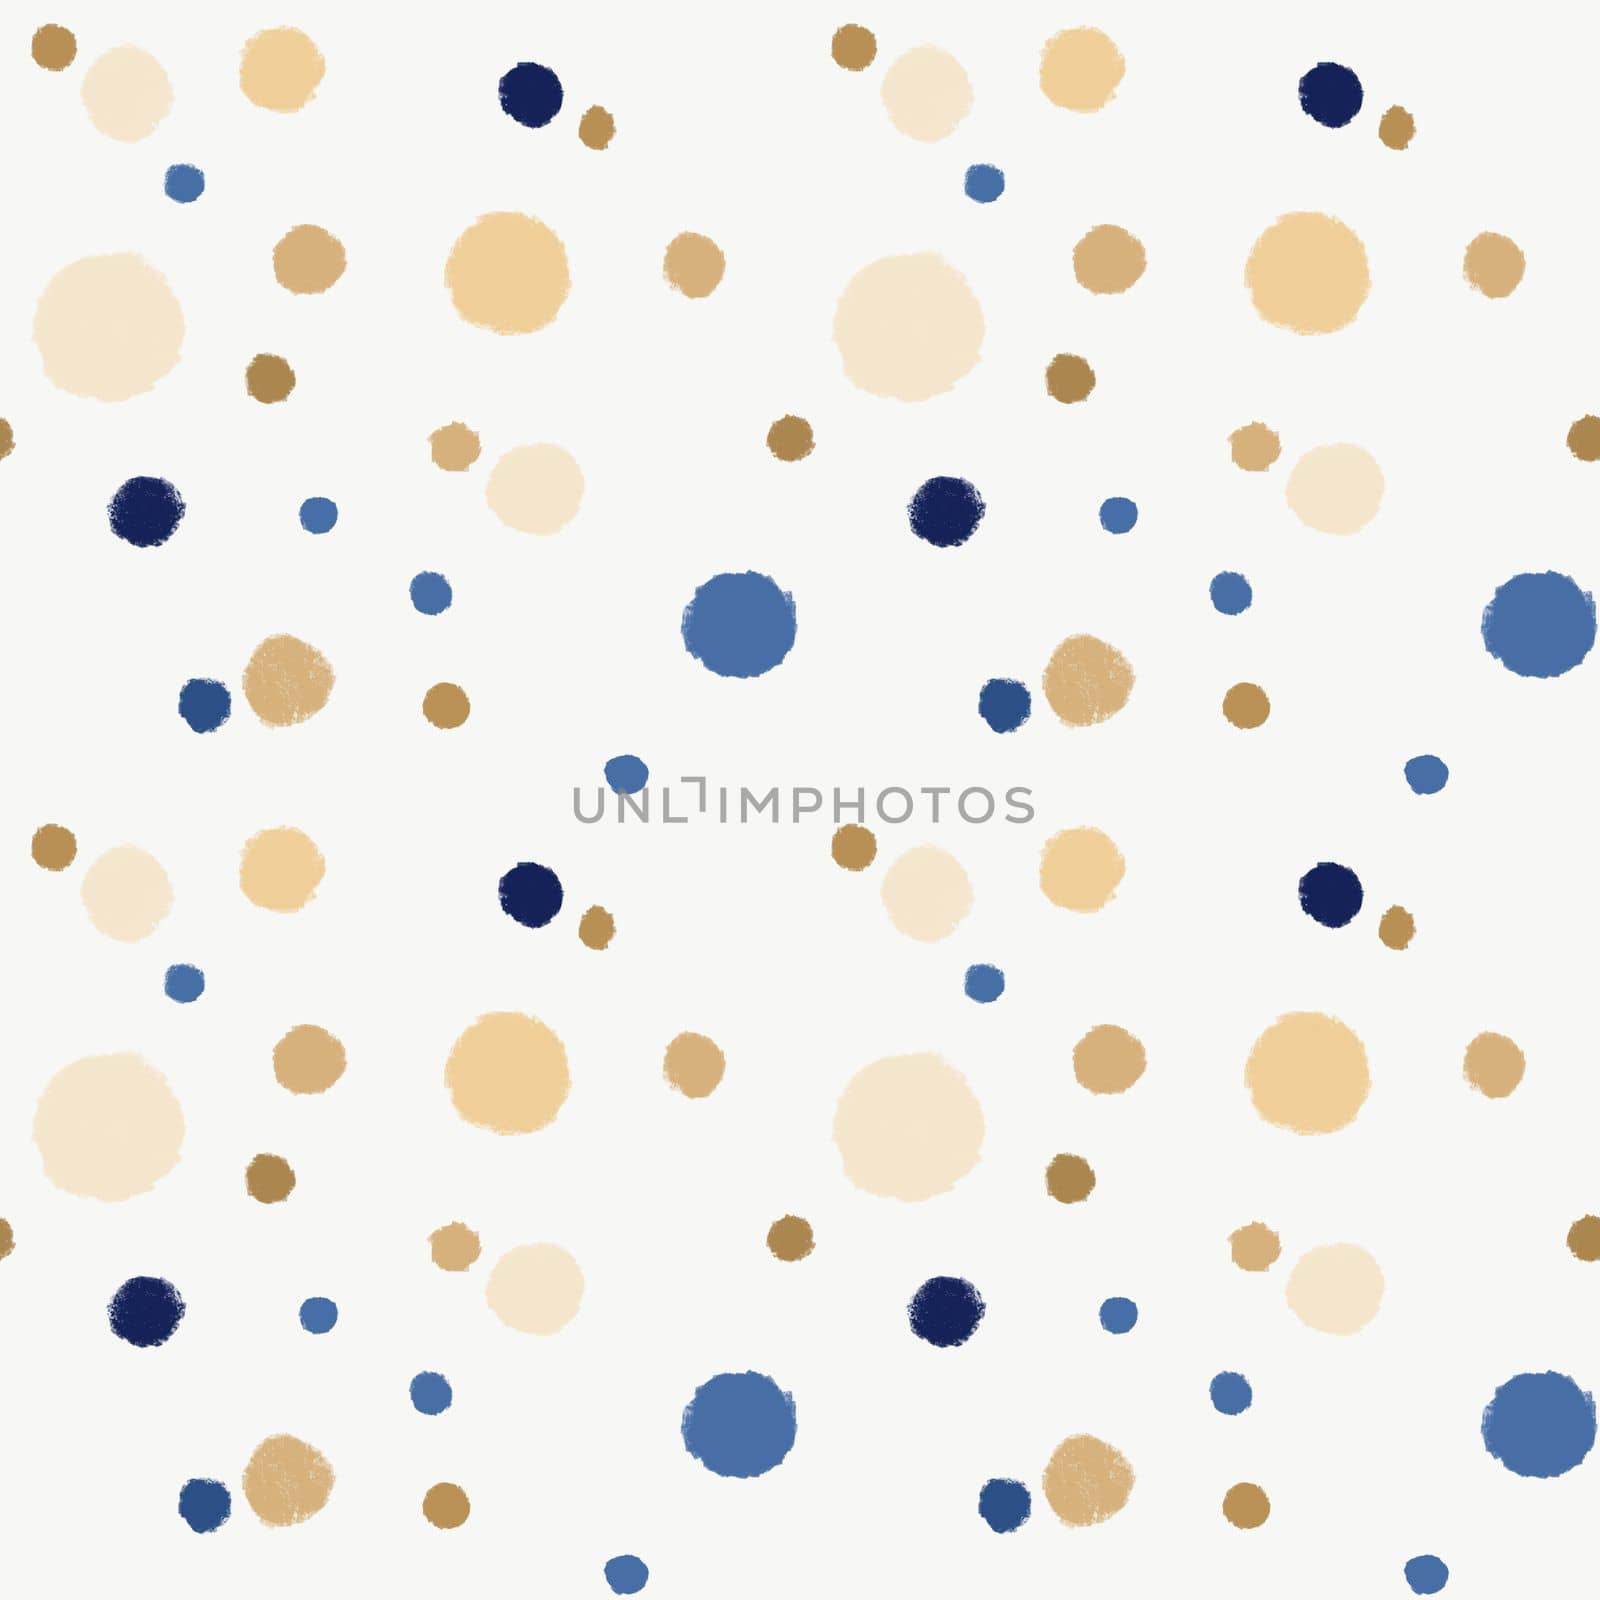 Seamless festive pattern with gold, blue and beige circles by Dustick